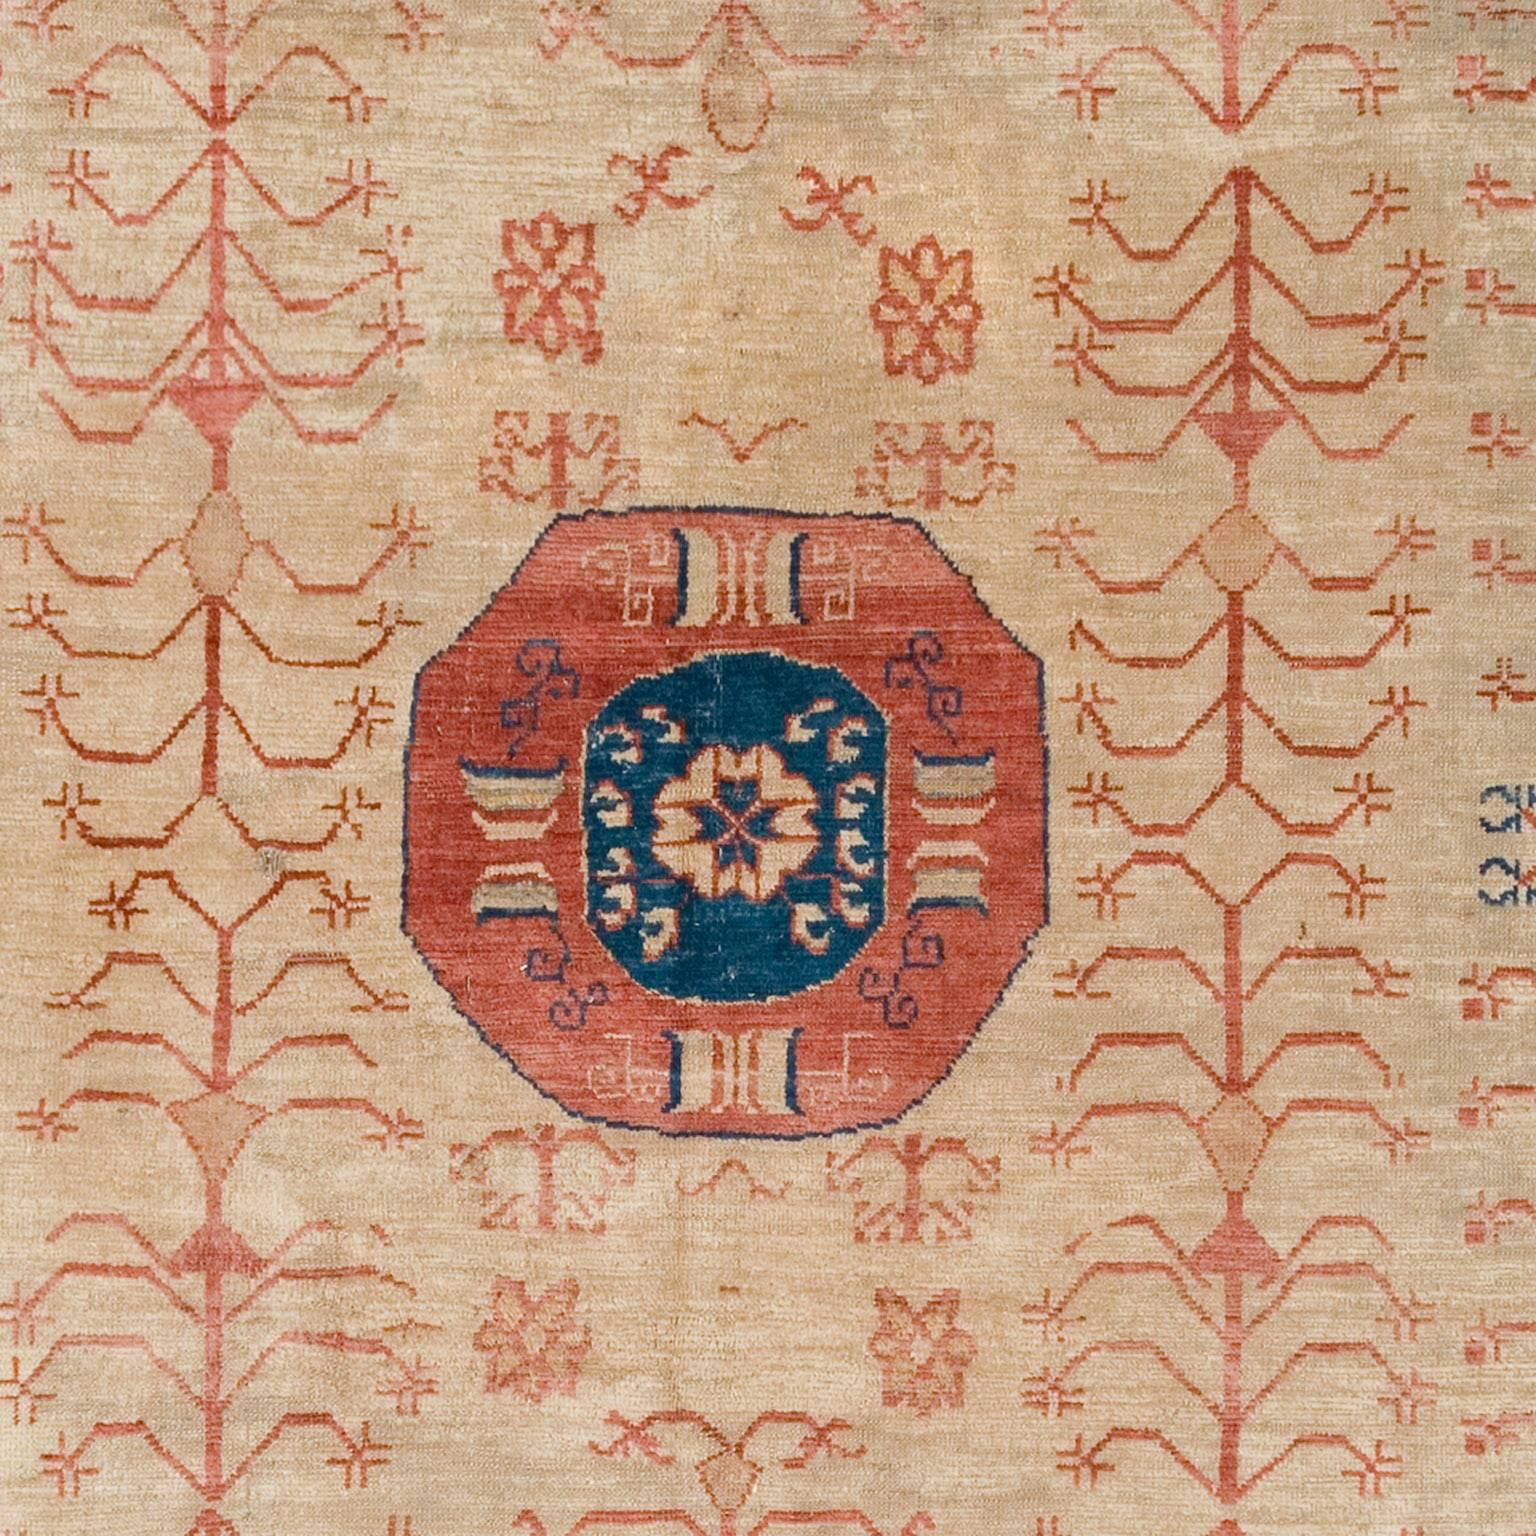 Hand-Woven Late 19th Century Chinese Khotan Carpet For Sale